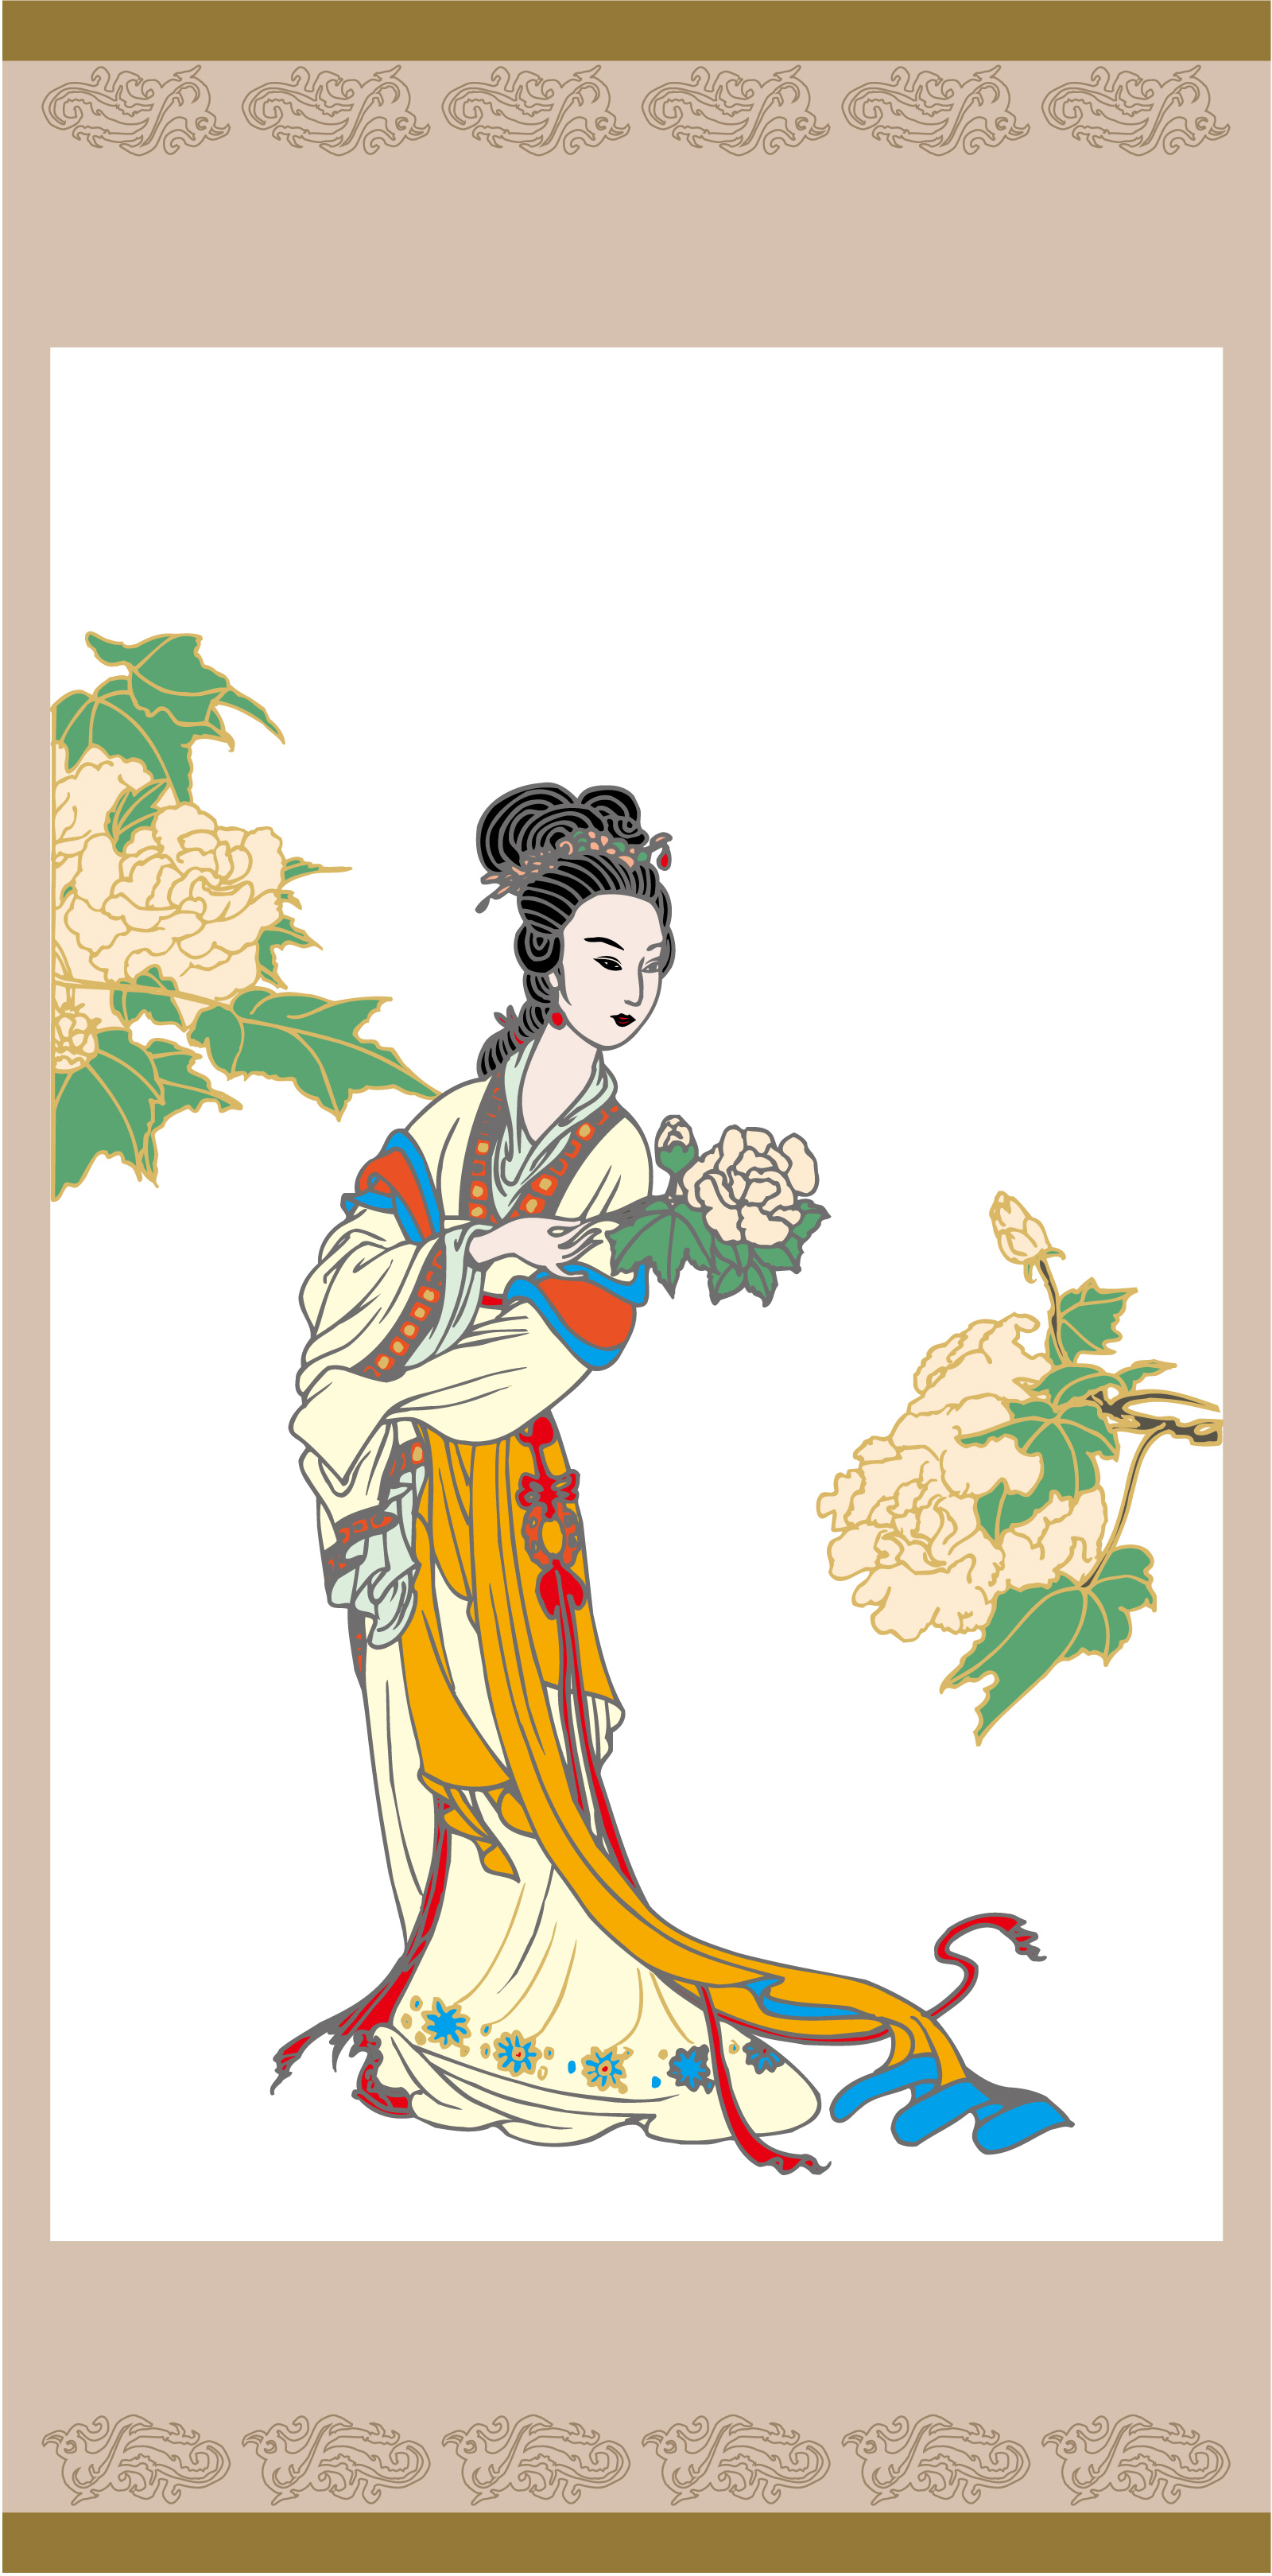 Graceful Chinese ancient ladies image - China Illustrations Vectors AI ESP Free Download #.3